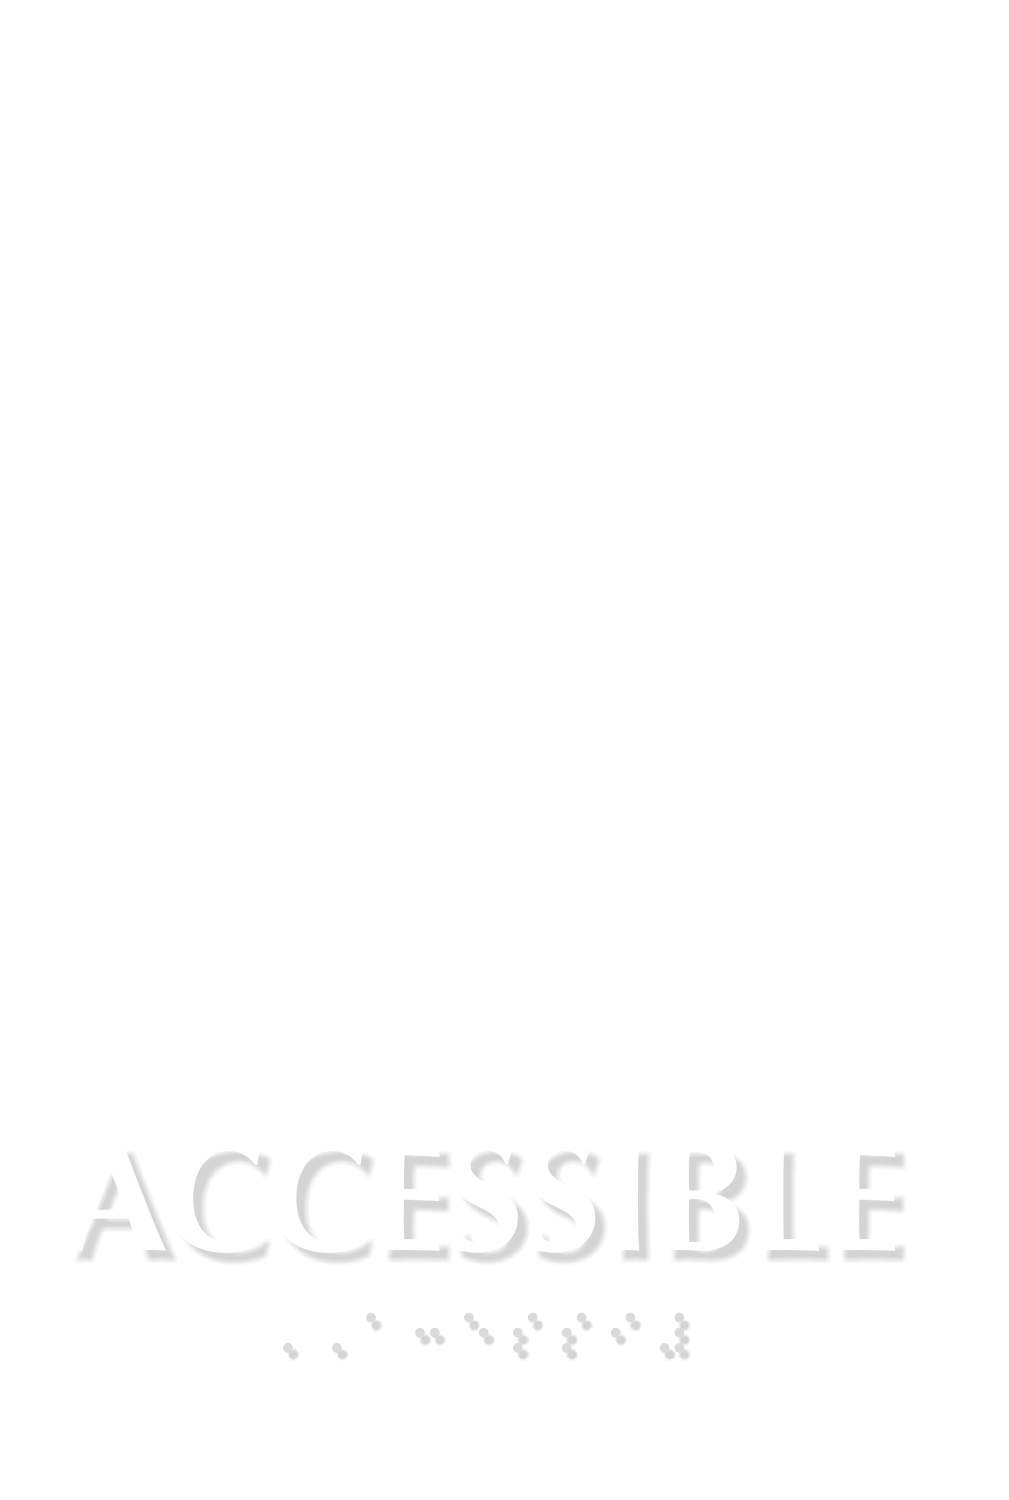 Accessible Restroom TactileTouch Braille Sign